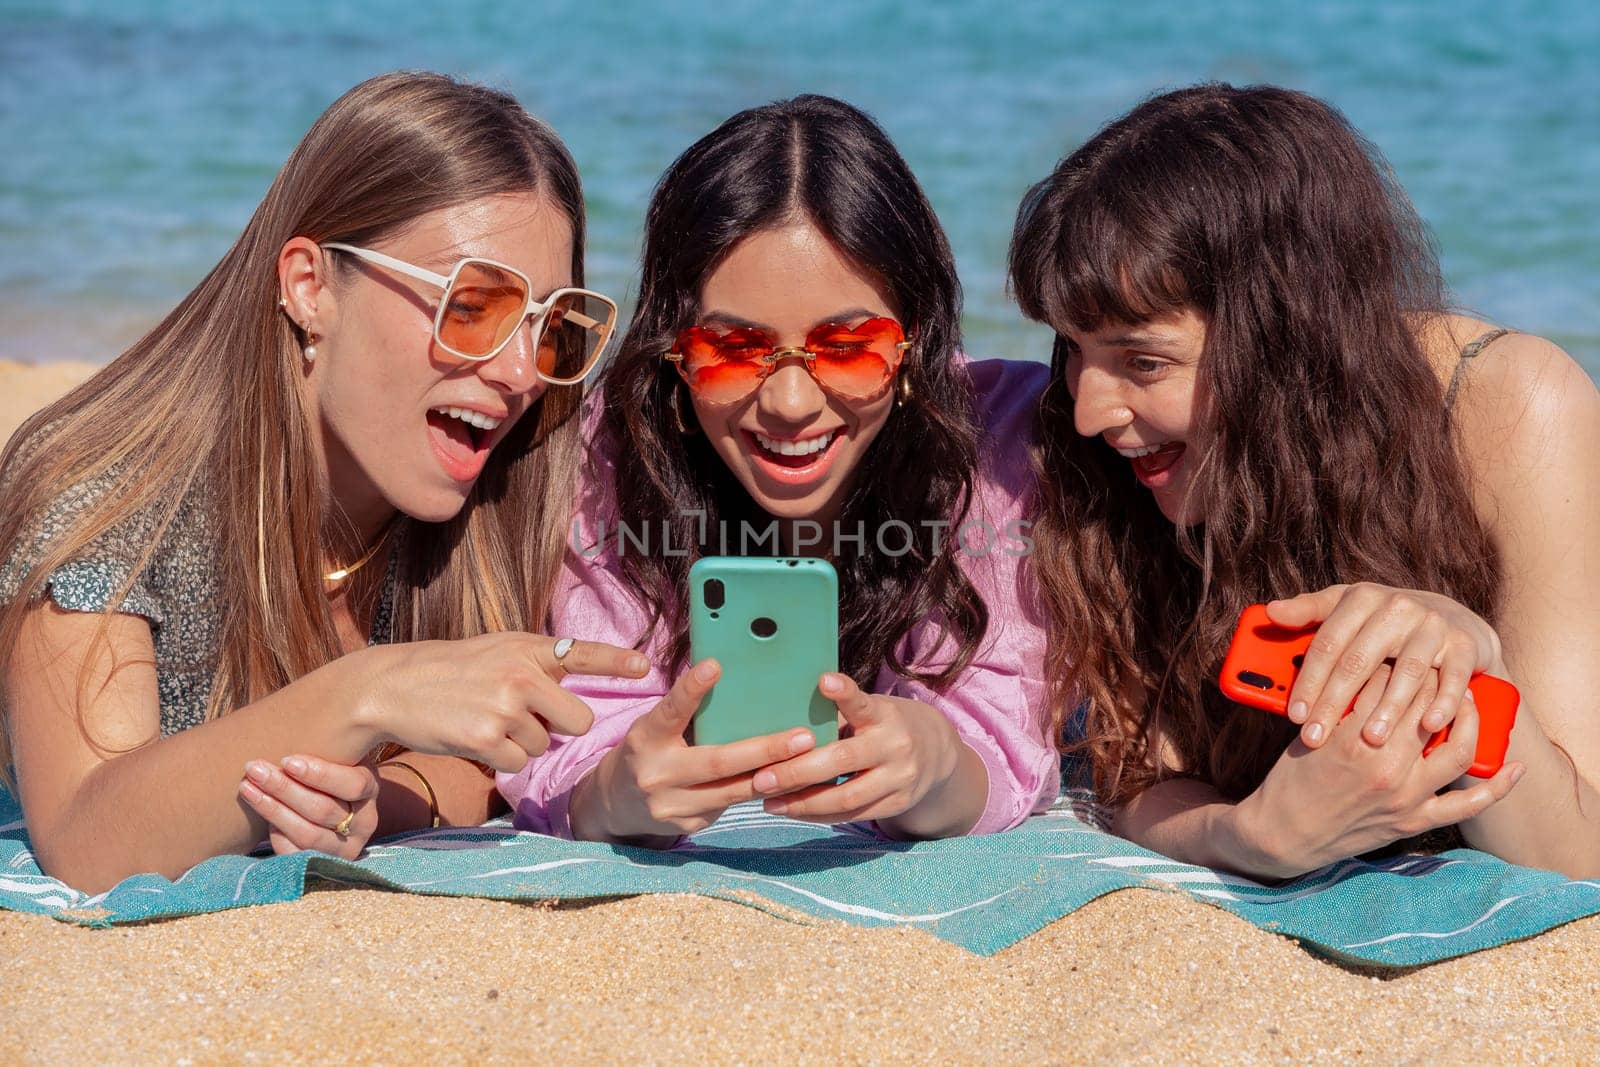 Three happy young friends on the beach using apps on their smartphones by mariaphoto3